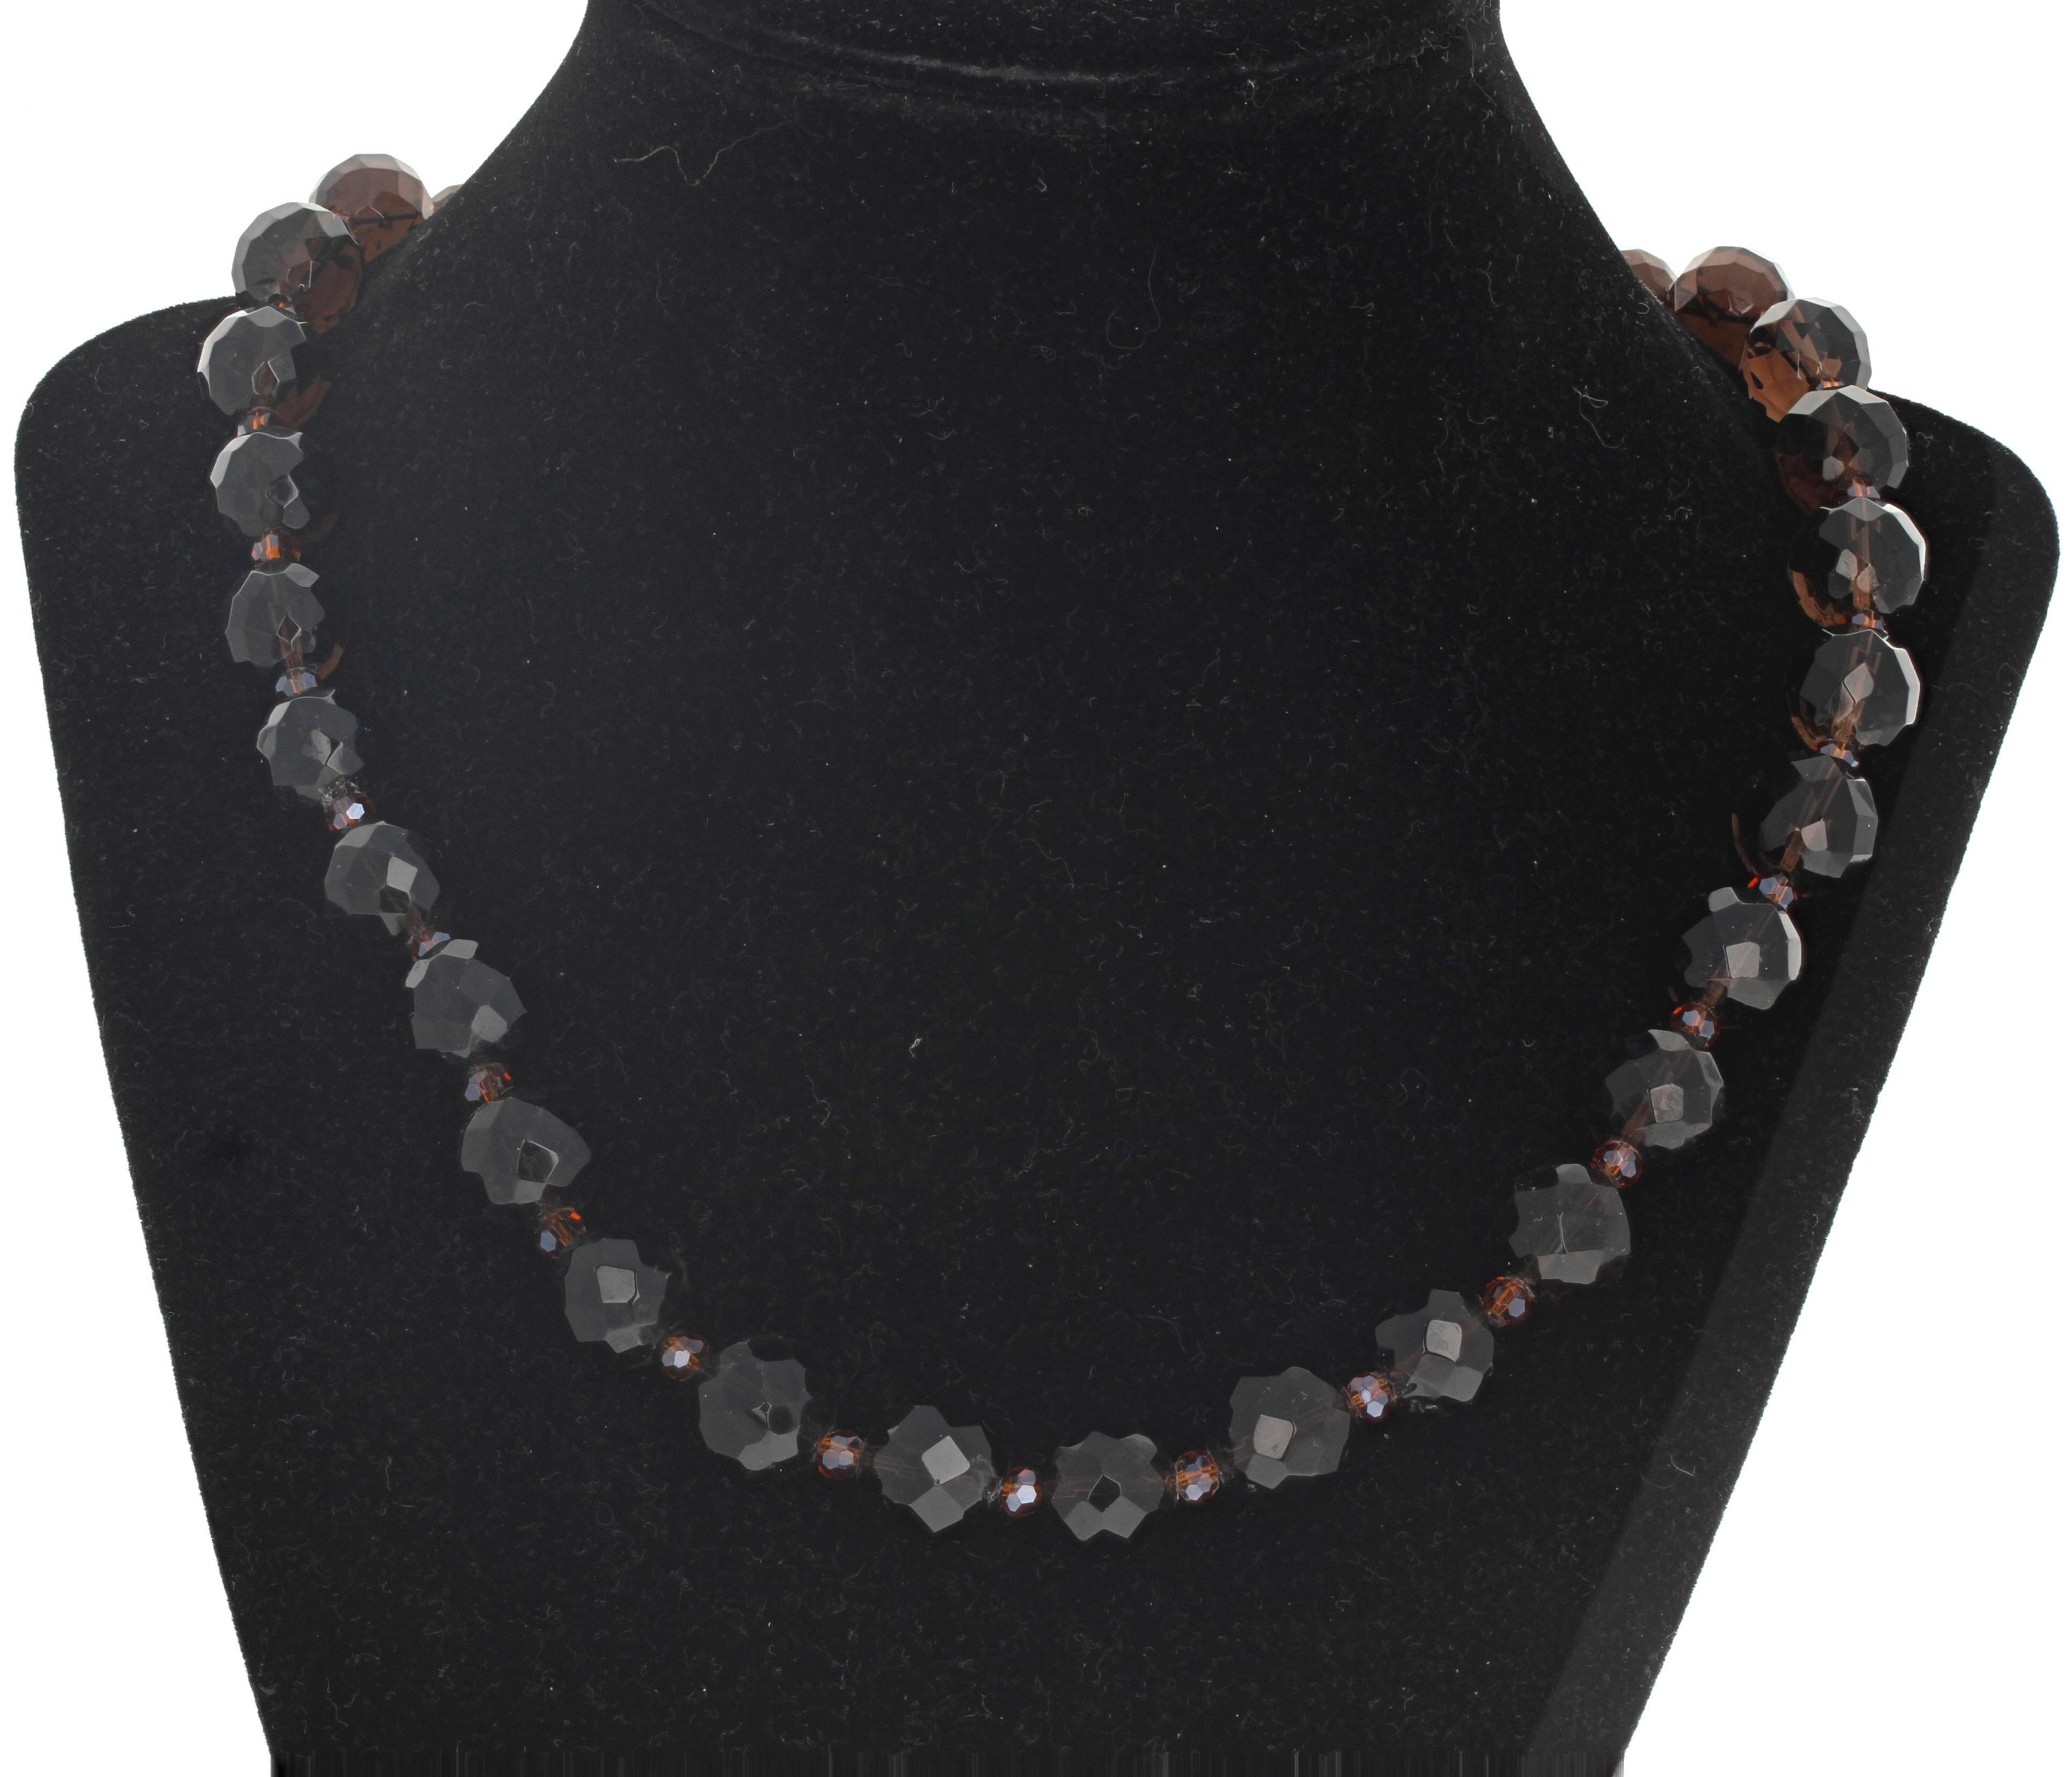 Mixed Cut AJD Magnificent Beautiful Very Dark Gemcut Smoky Quartz Necklace For Sale